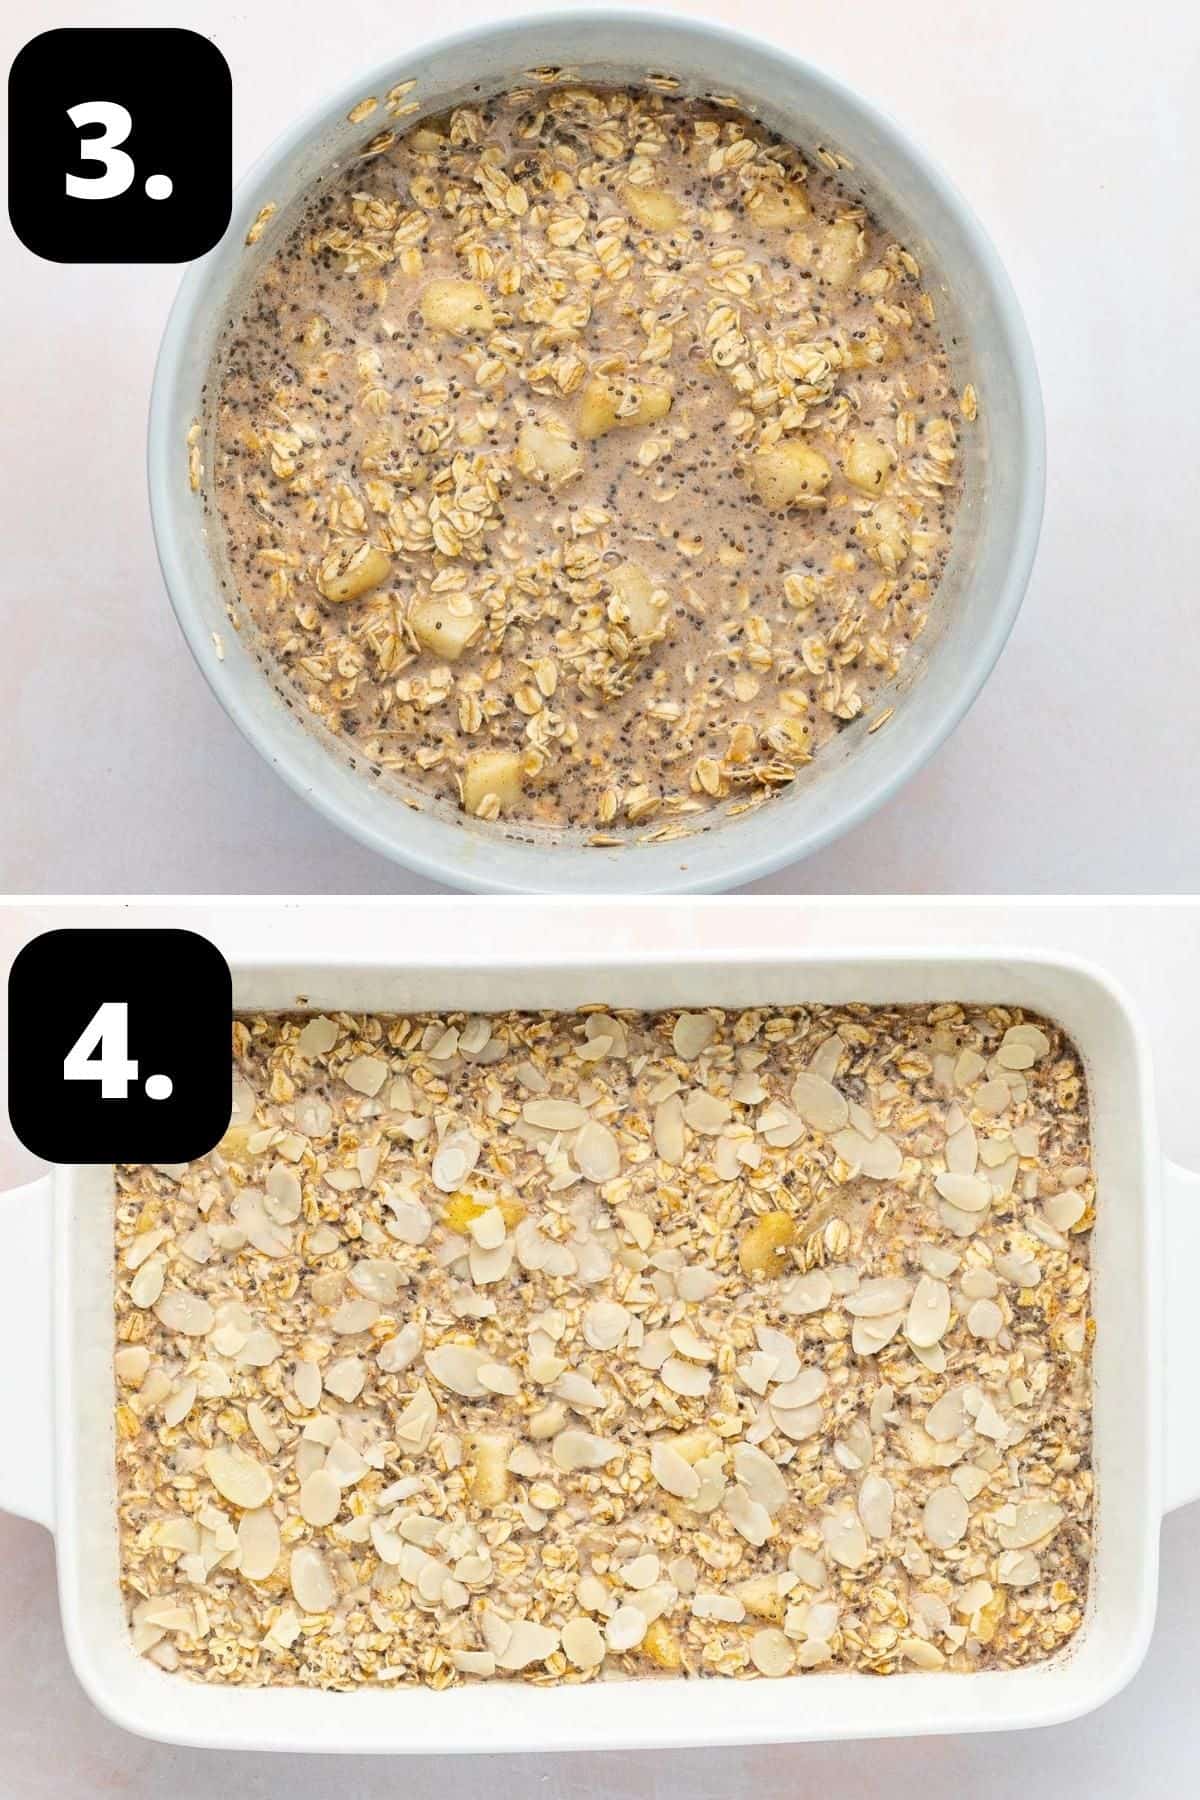 Steps 3-4 of preparing this recipe - the mixture in a bowl and in the rectangular baking dish, topped with flaked almonds.